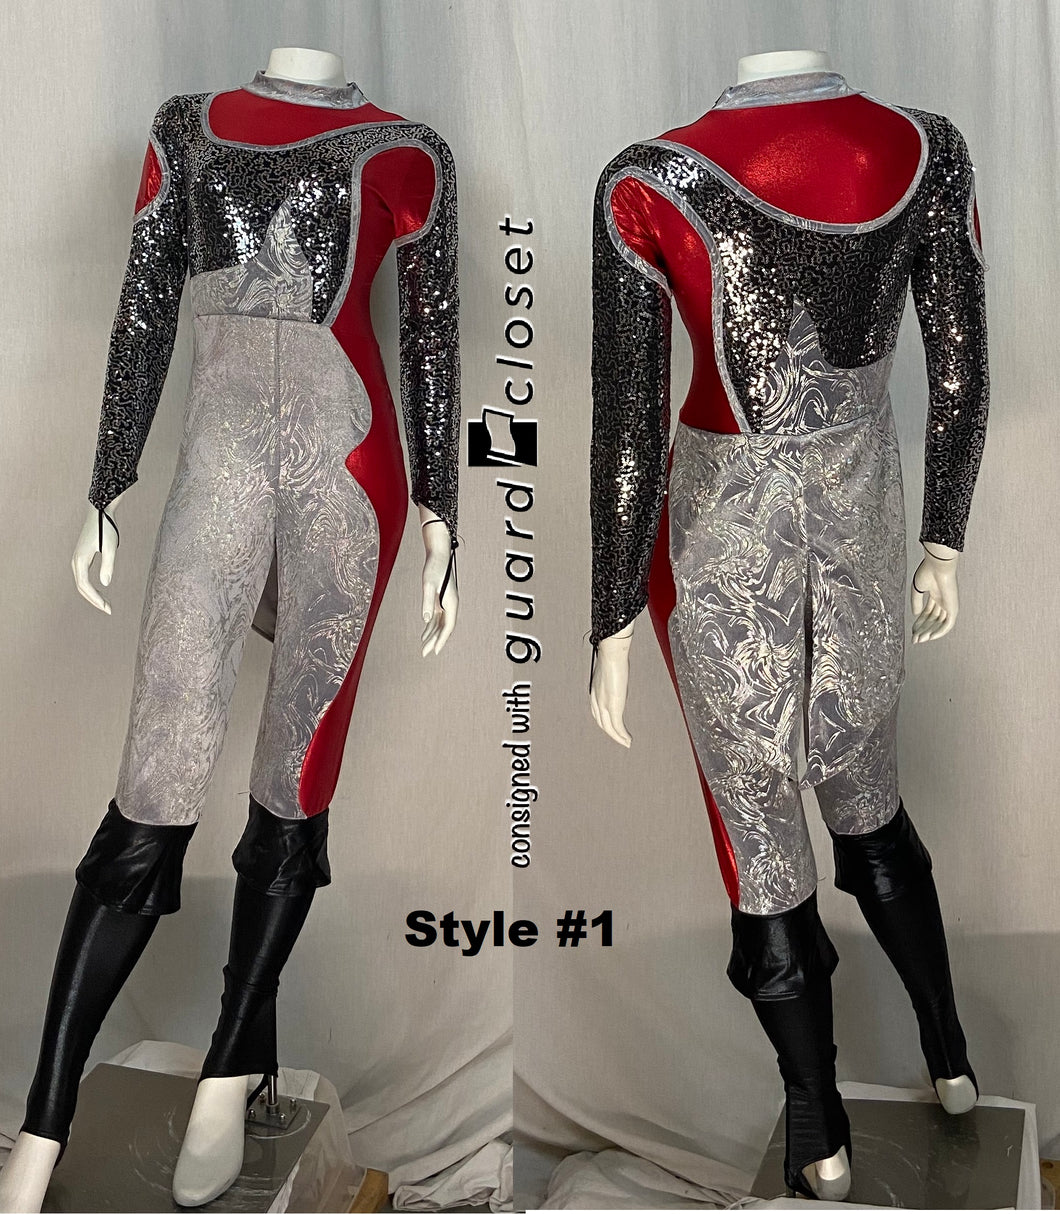 36 total red/black/silver tail coat unitards- 6 styles Dance Sophisticates